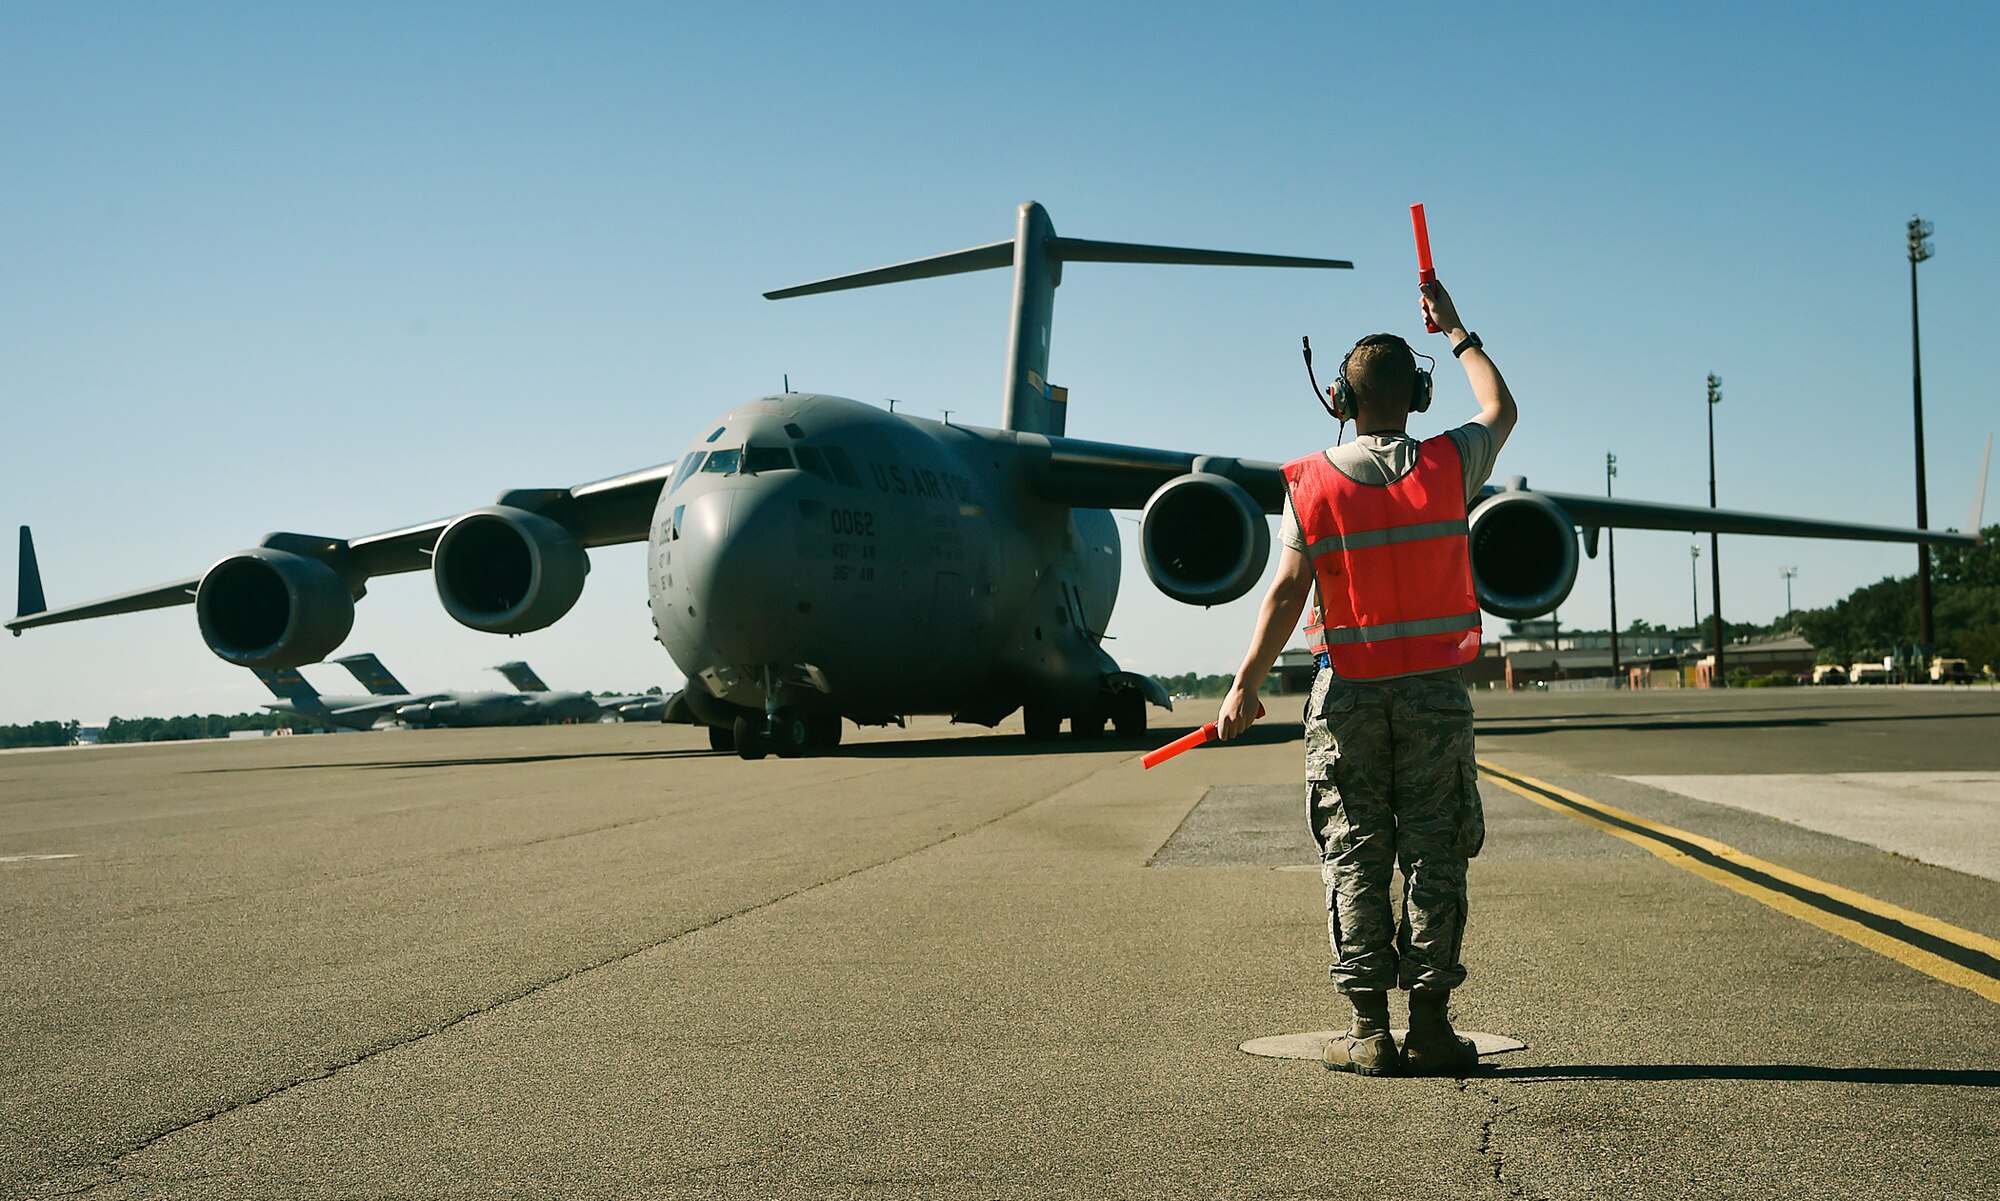 Airman 1st Class David Jackson, 437th Aircraft Maintenance Squadron, marshals out a C-17 Globemaster III here, as it prepares to depart to Joint Base Lewis-McChord, Washington State, in support of Exercise Mobility Guardian July 31. Mobility Guardian is designed to enhance the capabilities of mobility Airmen to succeed in dynamic threat environments. The exercise features more than 3,000 participants and involves 25 countries from July 31 to Aug. 11. (U.S. Air Force photo by Staff Sgt. Christopher Hubenthal)